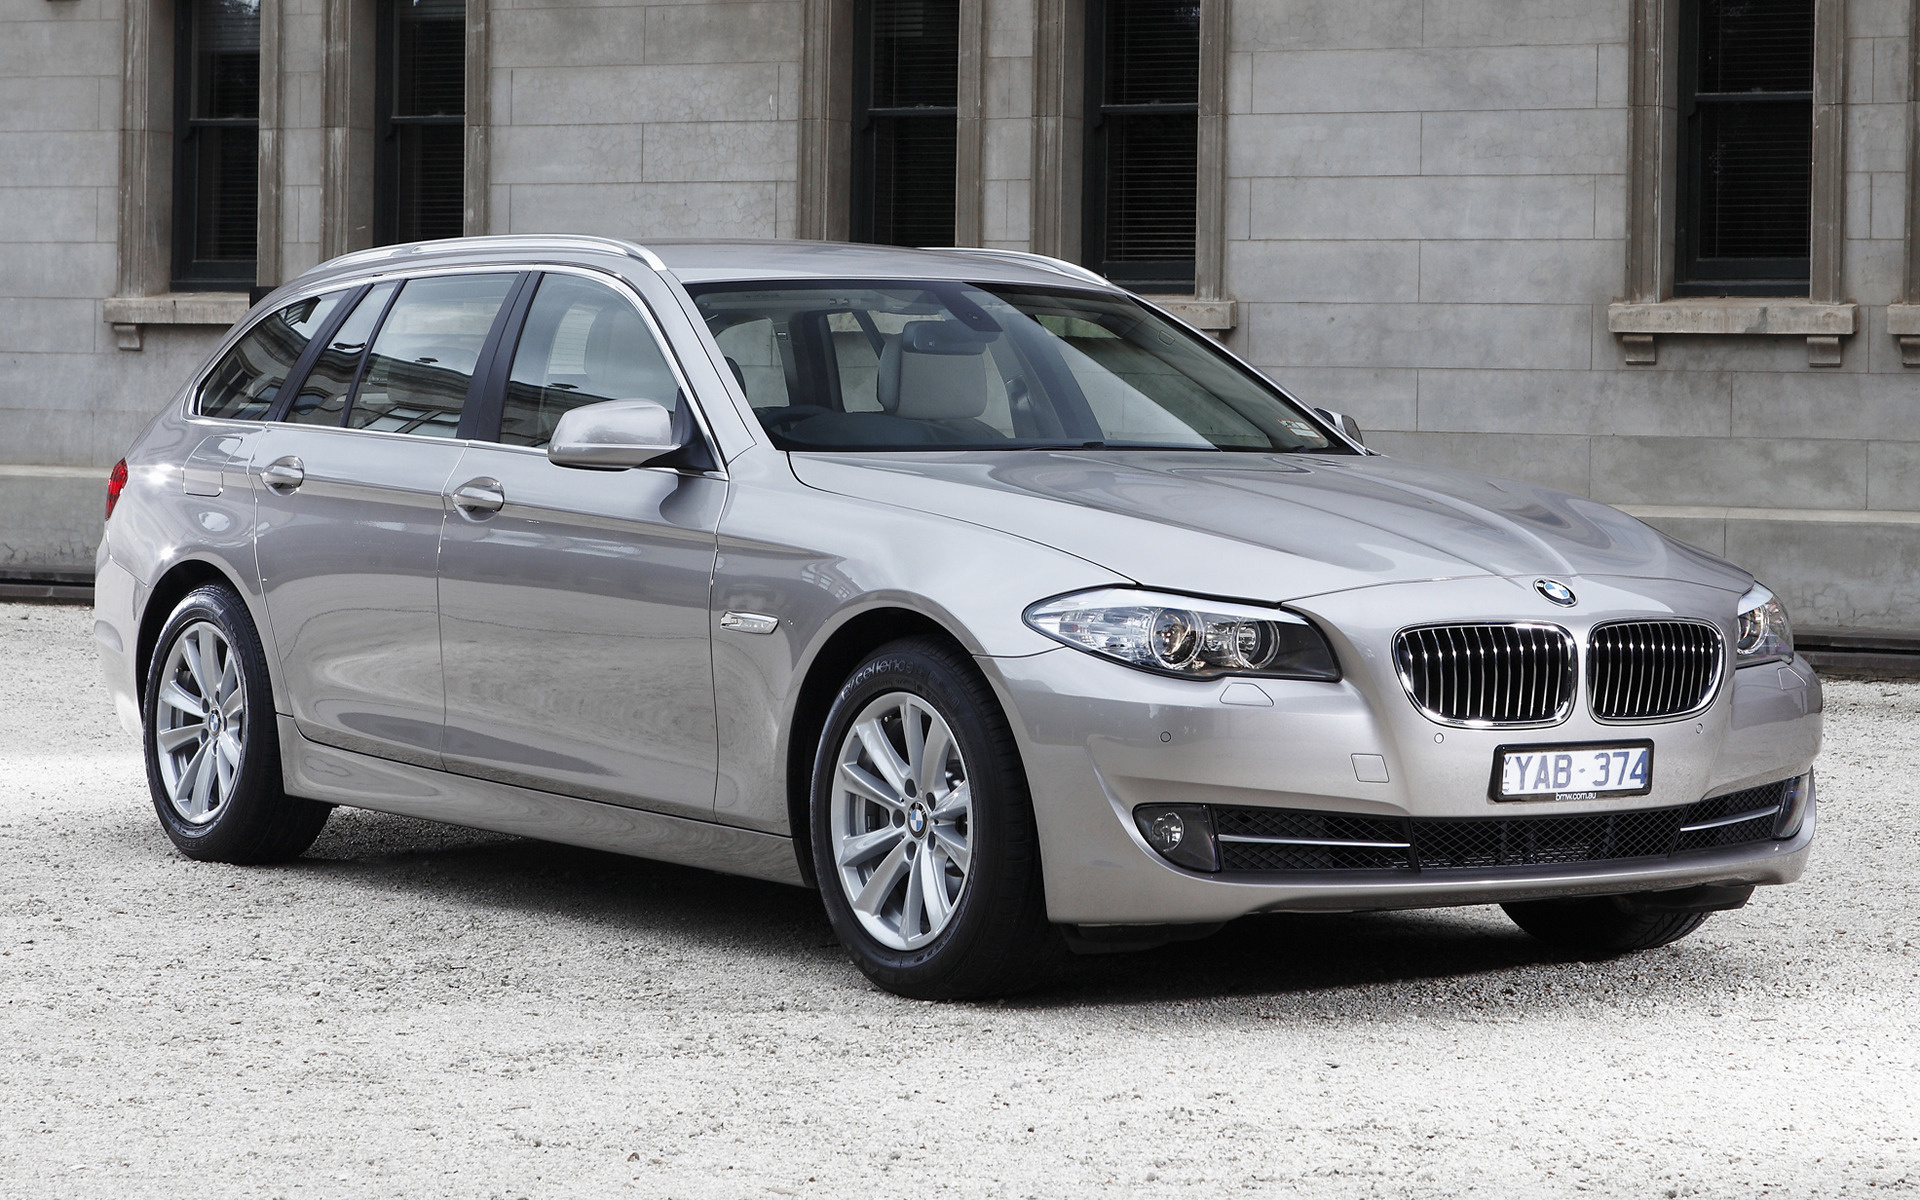 Virus Auto Frank Worthley 2011 BMW 5 Series Touring (AU) - Wallpapers and HD Images | Car Pixel